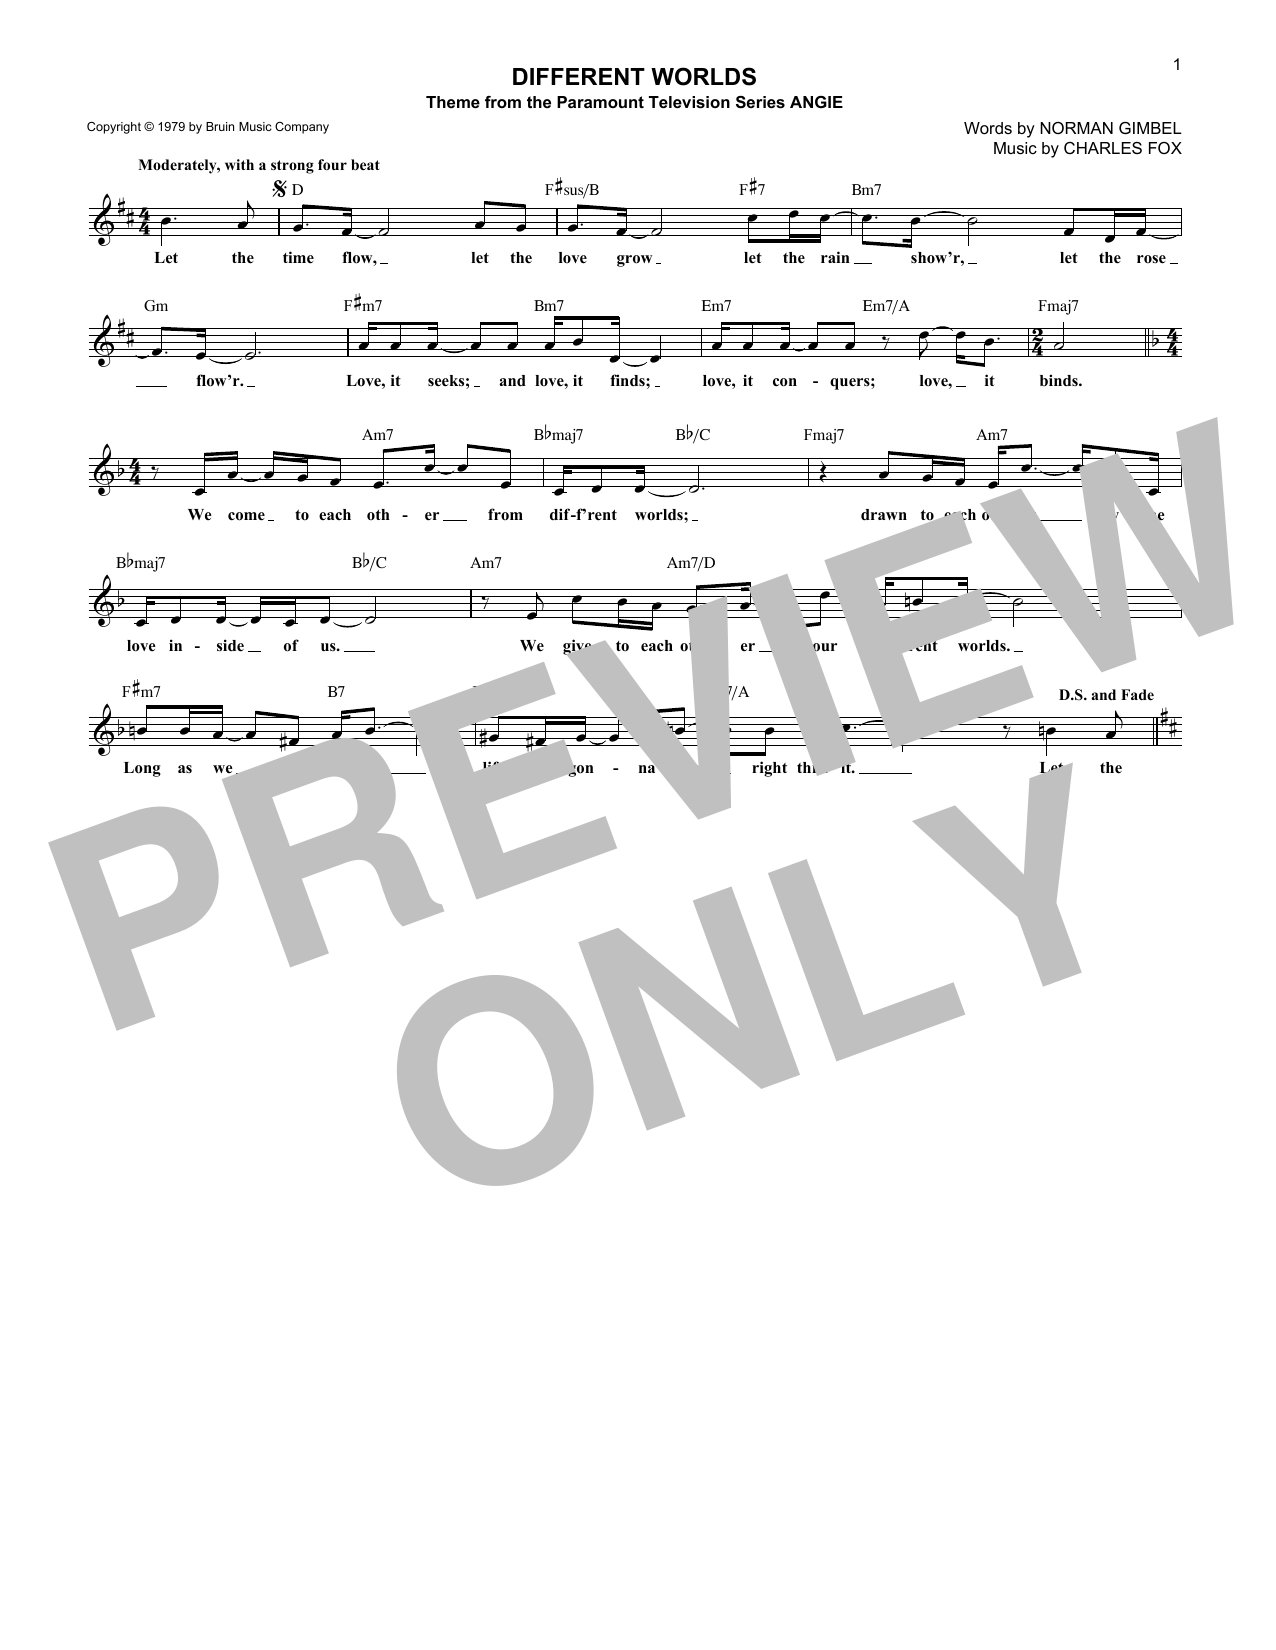 Download Charles Fox Different Worlds Sheet Music